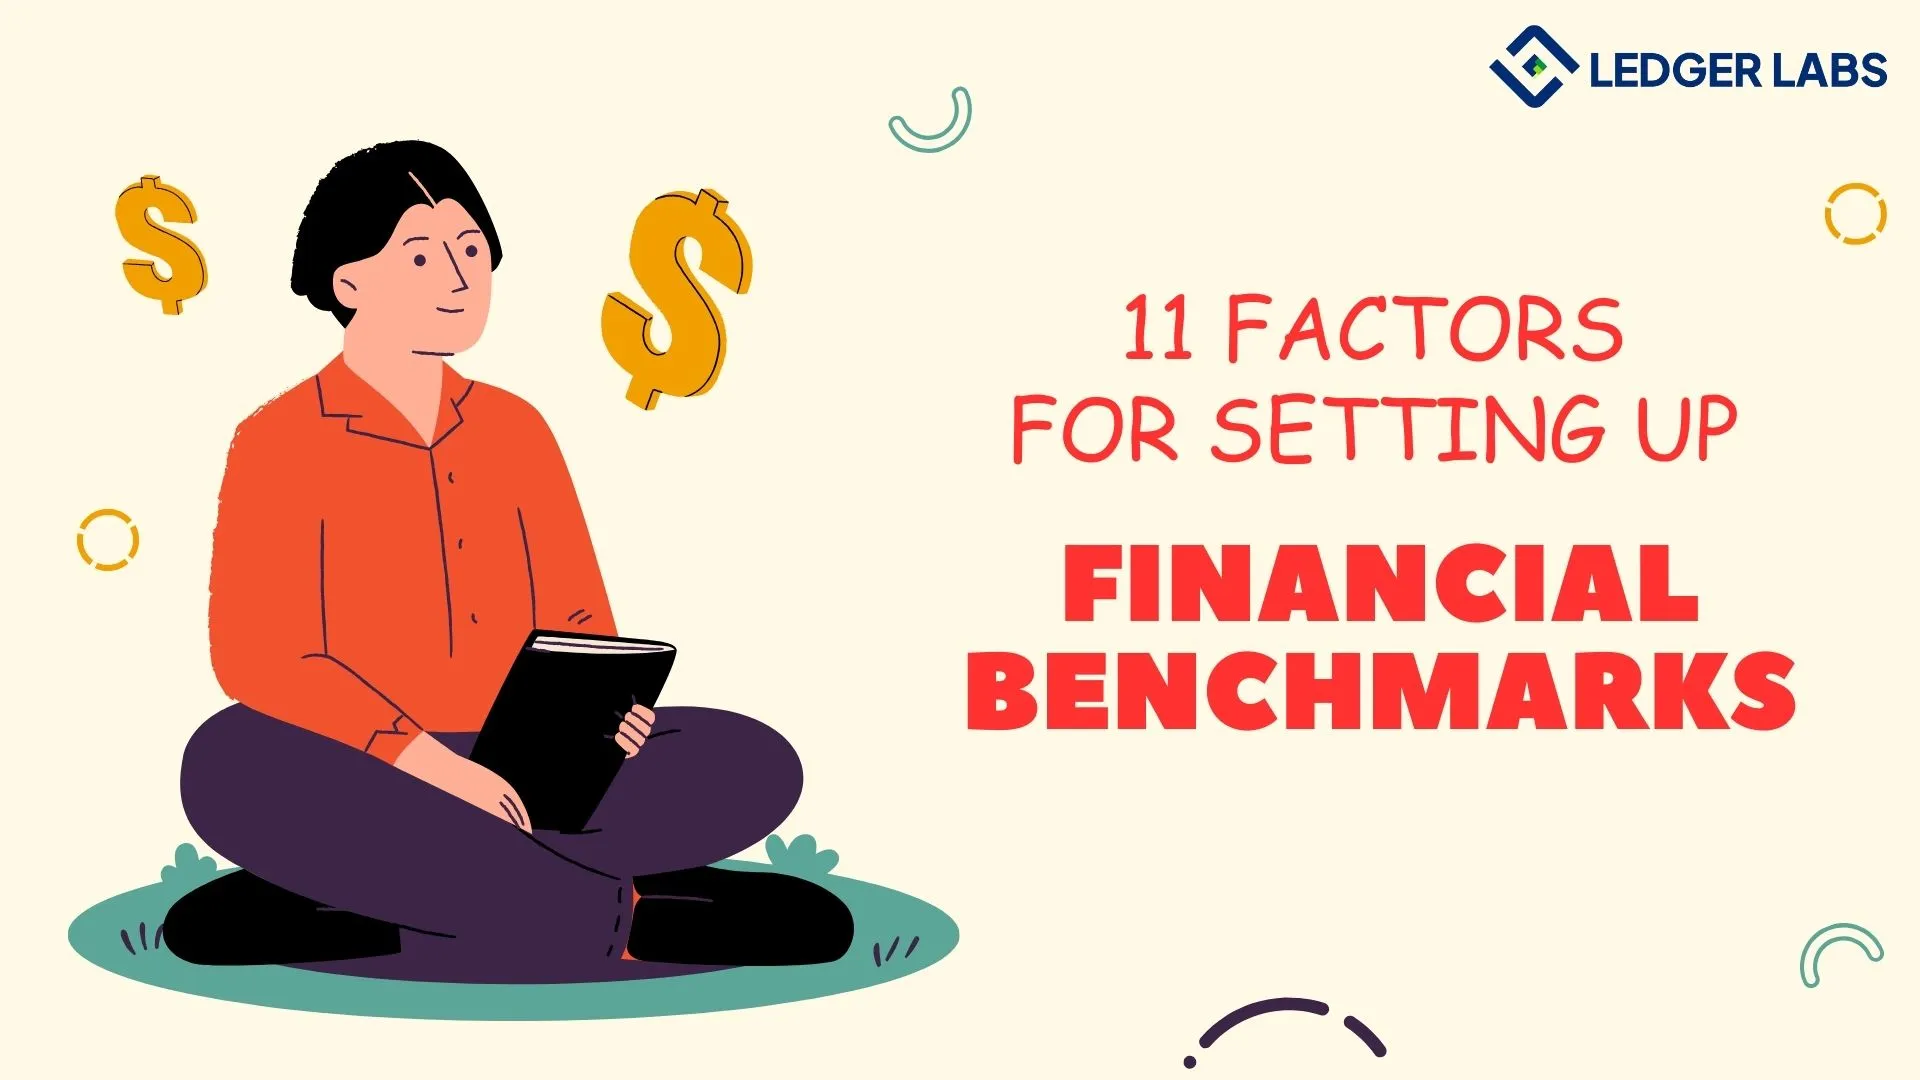 11 Factors for Setting up Financial Benchmarks